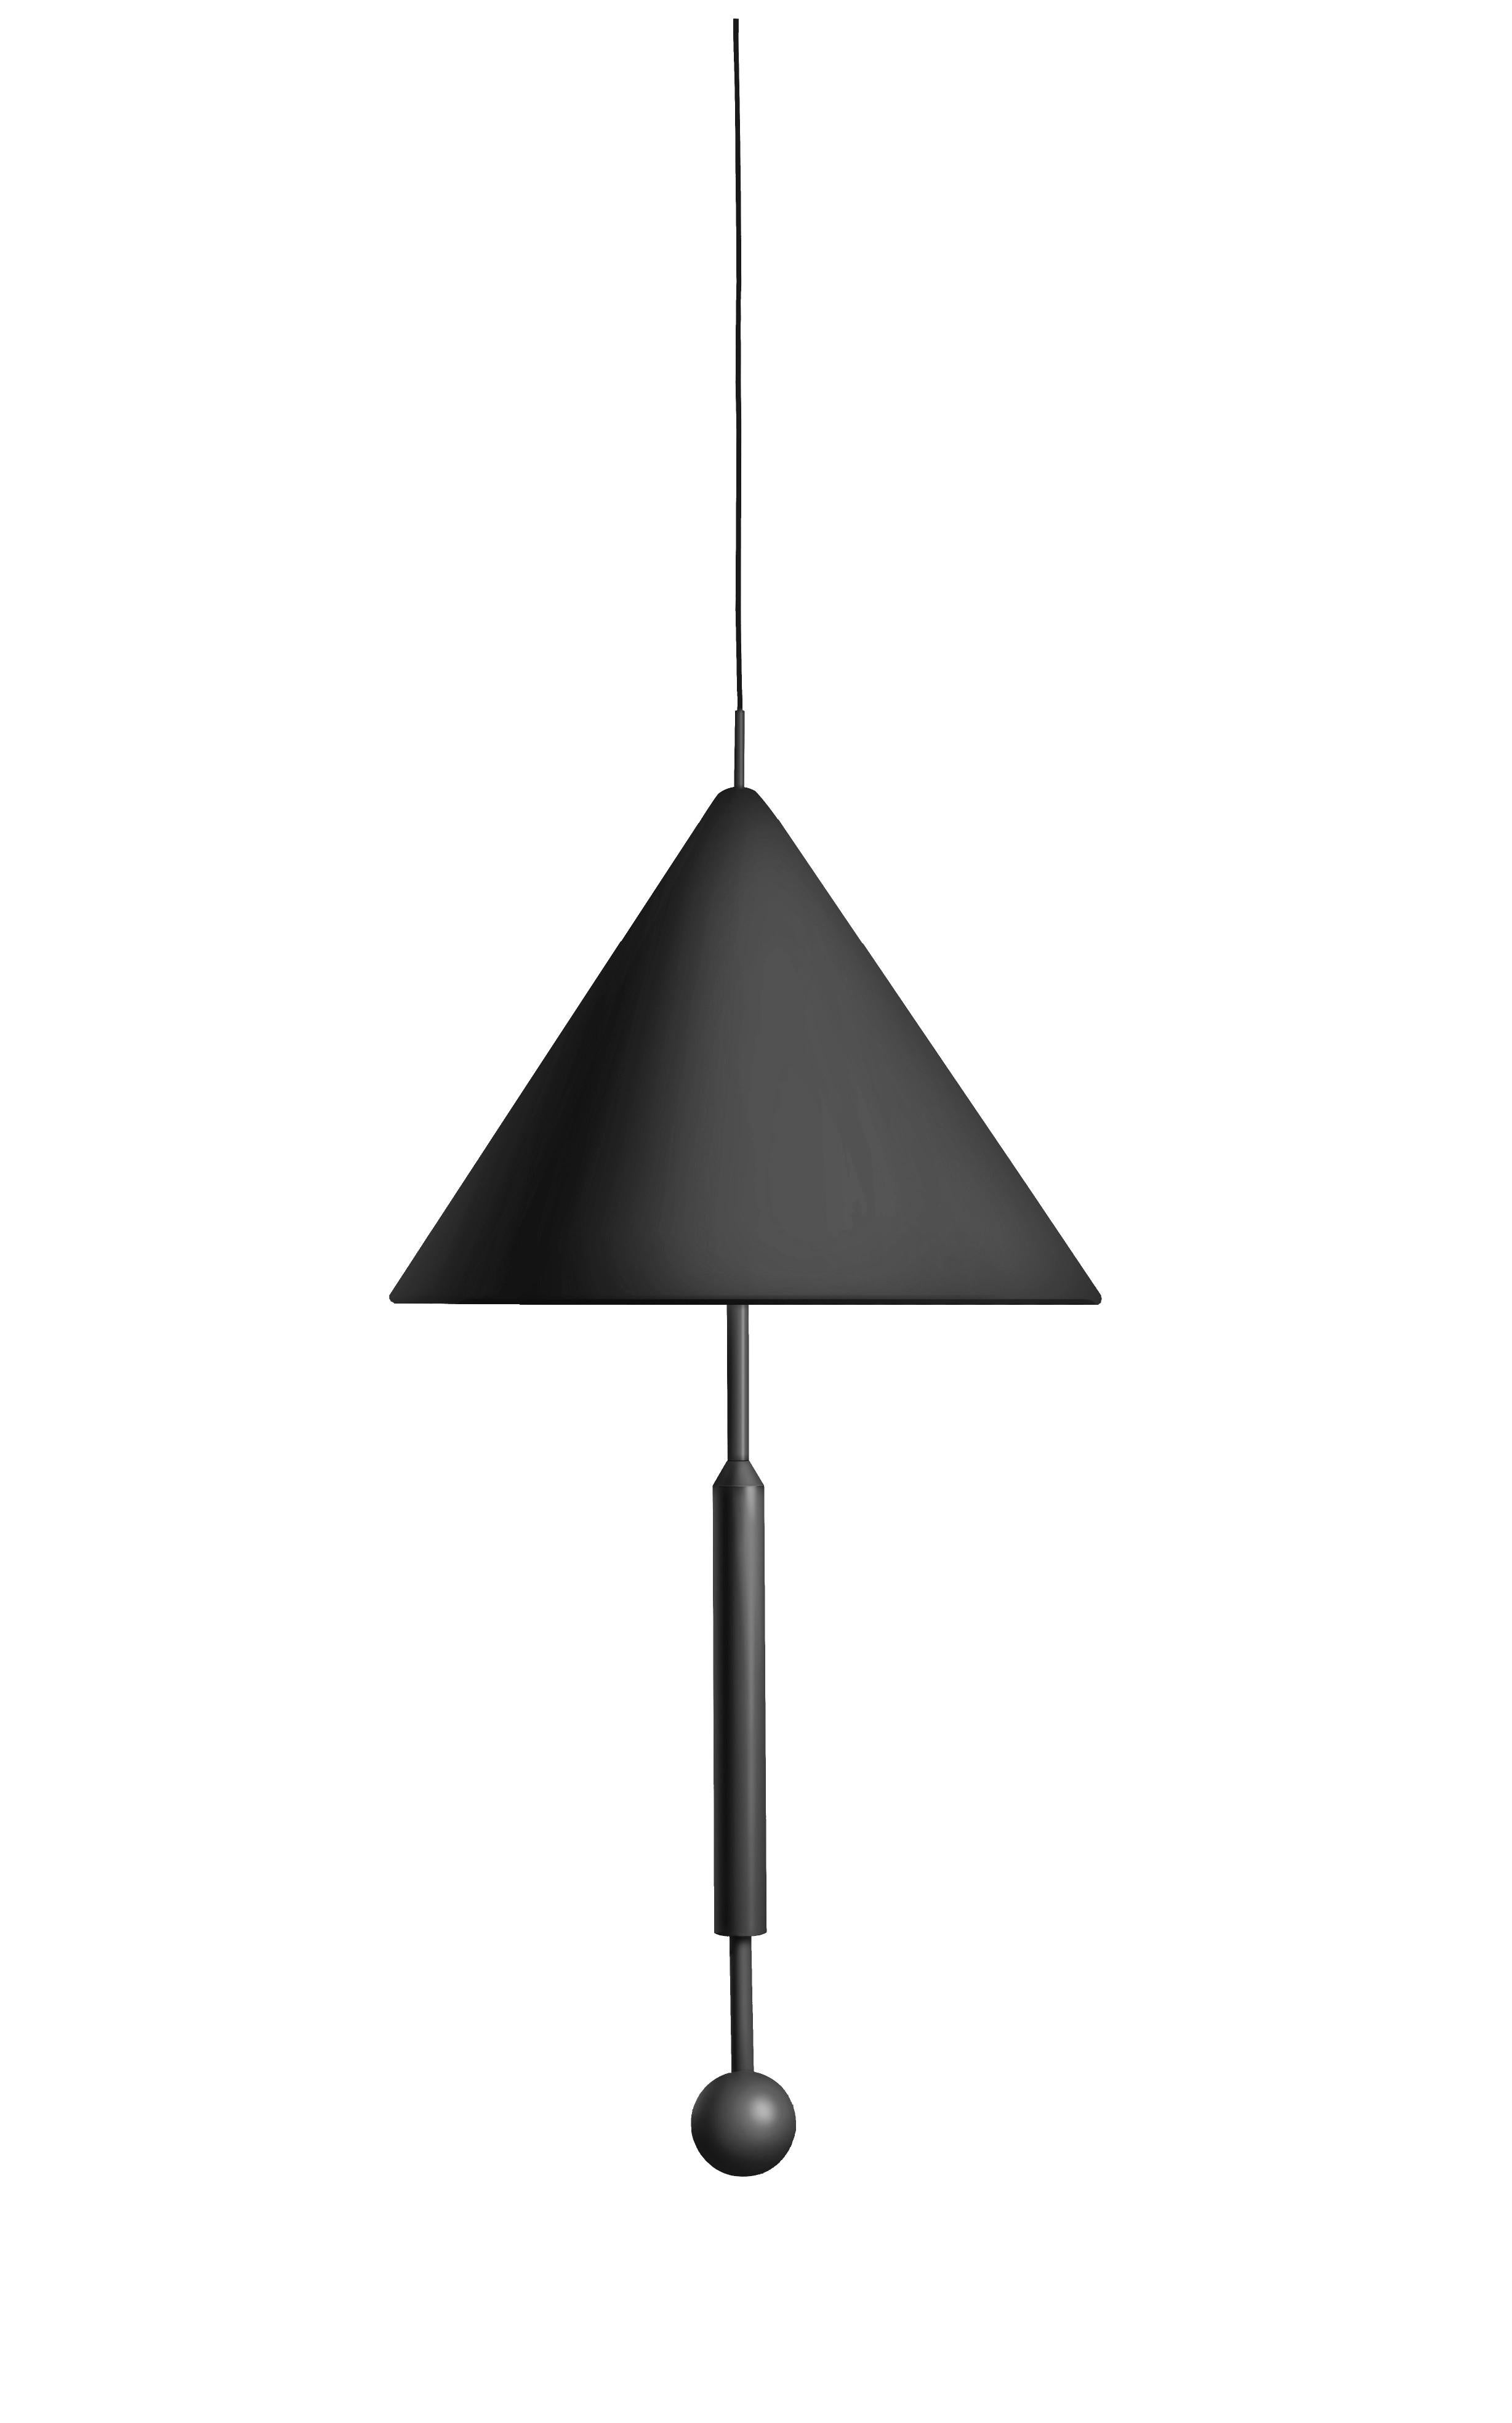 Colorful pendant lamp by Thomas Dariel, Maison Dada
Measures: Diameter 80 x height 165 cm
Fabric lampshade, powder coated metal base
Monochromatic
Colour cable, adjustable cable height (max 2.4m)
Available in 5 colors (Celadon, red, black, yellow